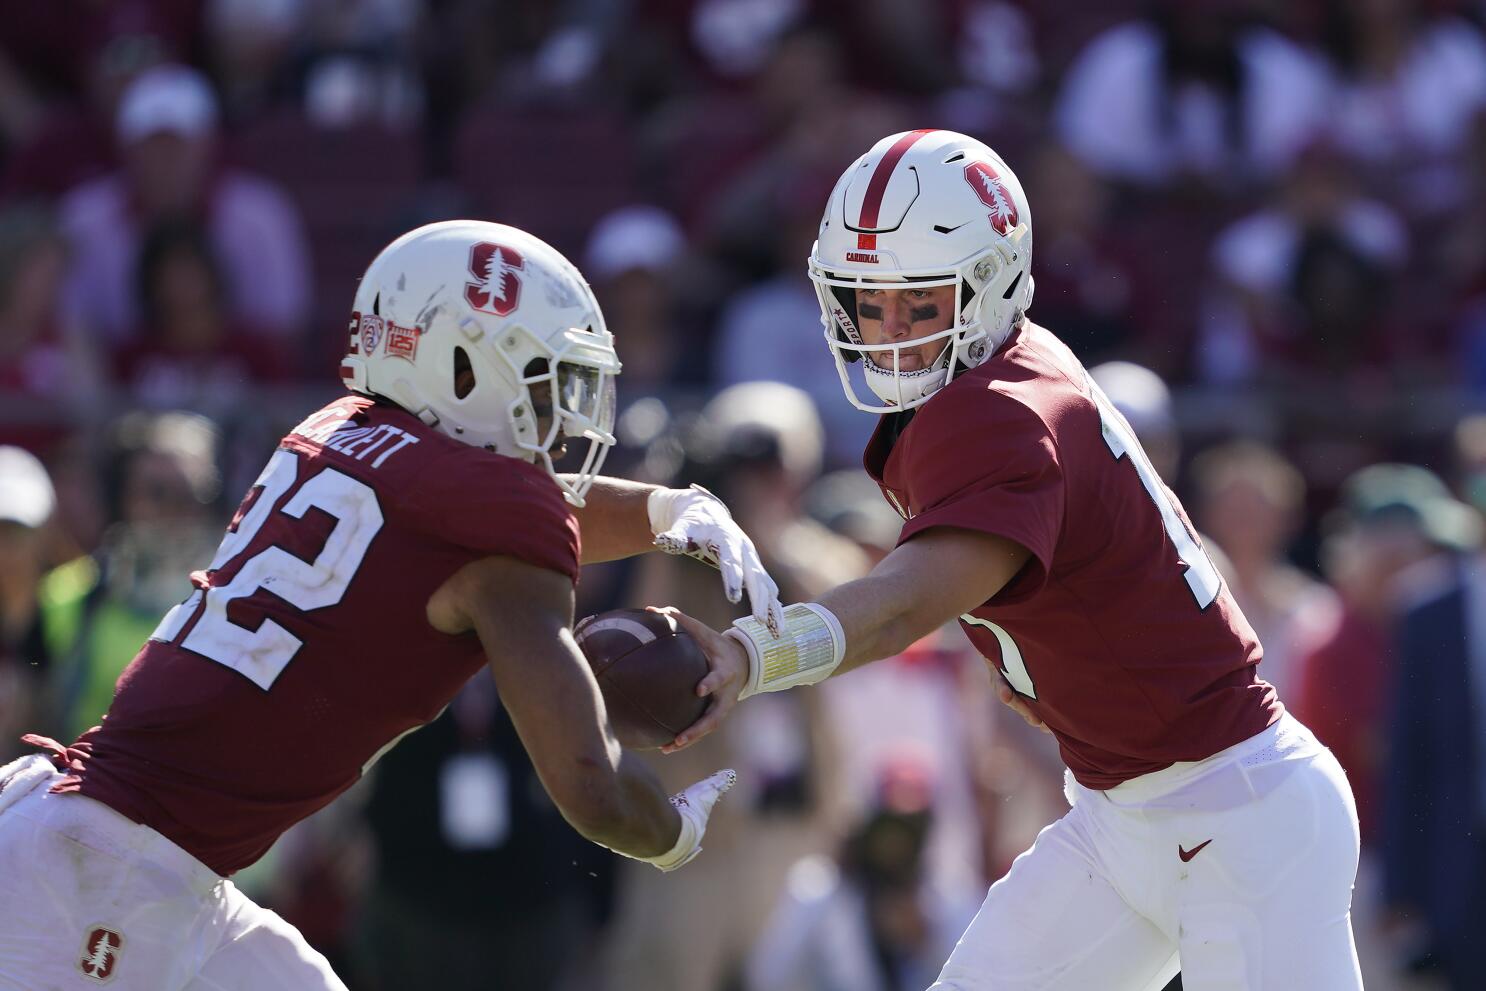 Saturday's game could all but decide the winner of Texas and Stanford